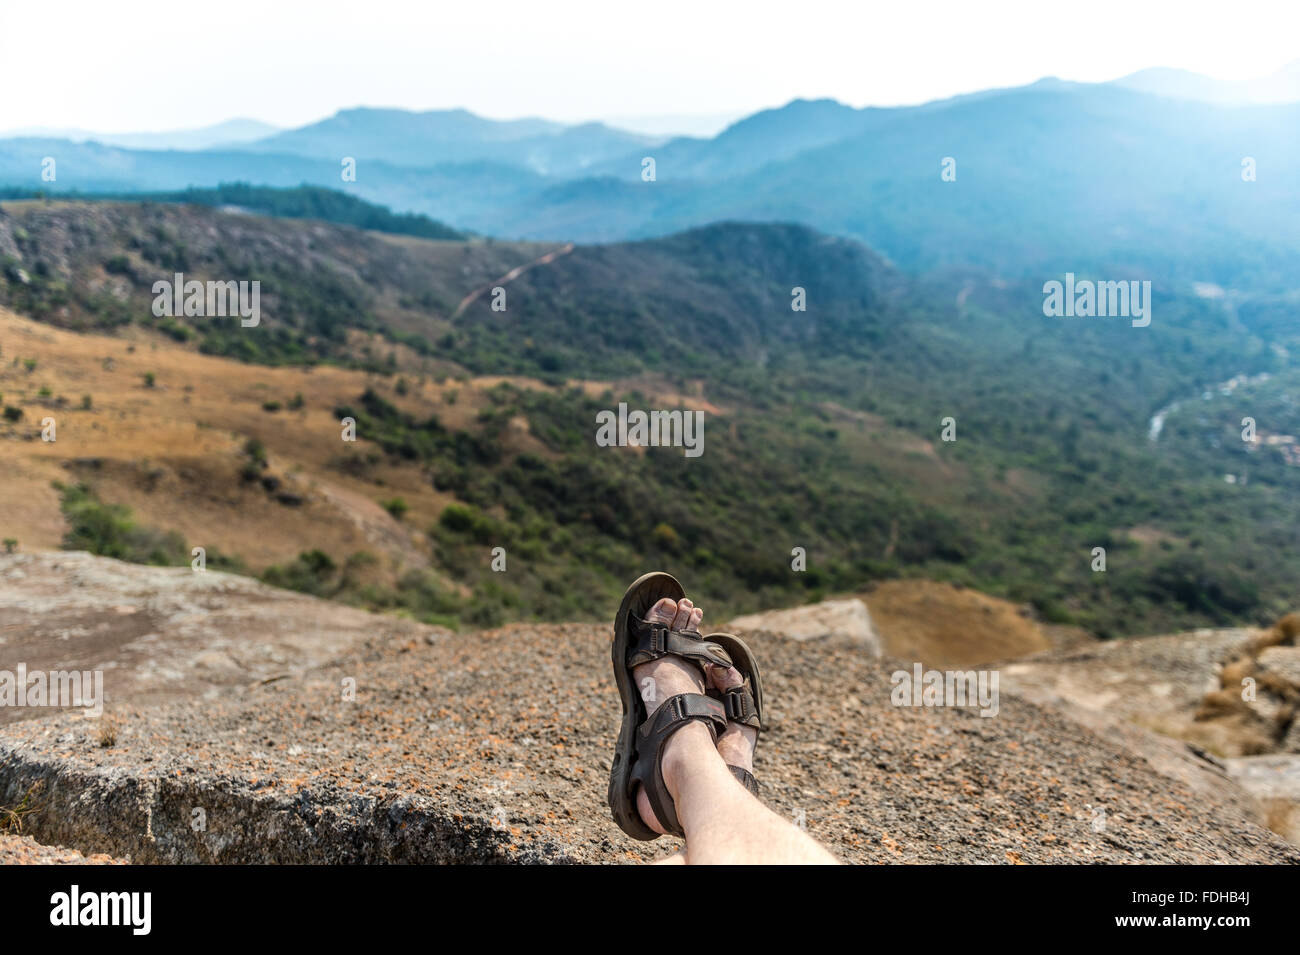 Man's feet lounging in front of a mountain landscape at the Mlilwane Wildlife Sanctuary in Swaziland, Africa. Stock Photo